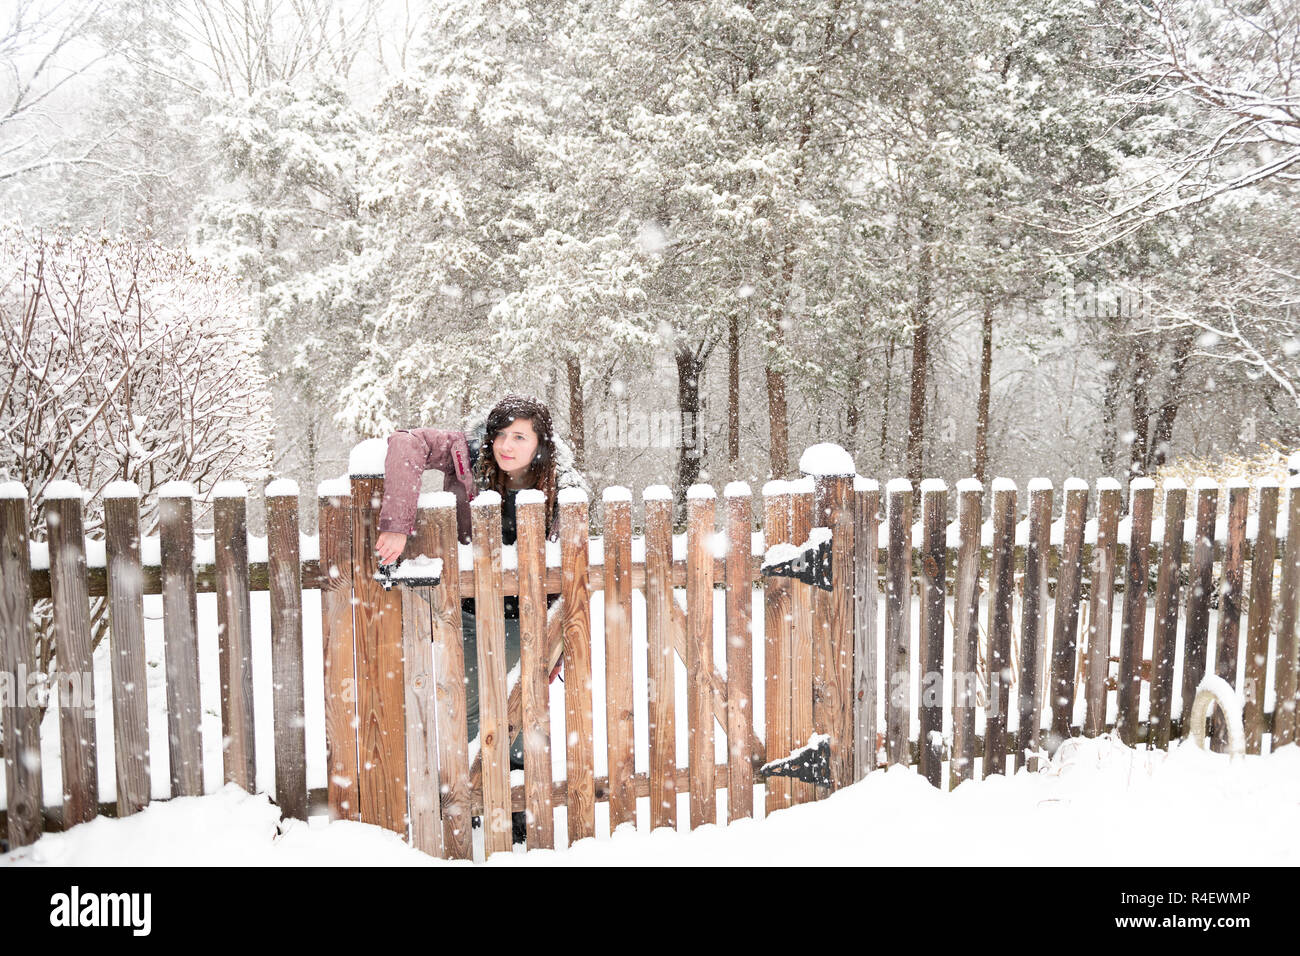 Young woman standing, opening wooden home, house fence gate outside, outdoors, outdoor front yard, backyard, heavy snowstorm, storm, snowing, falling  Stock Photo